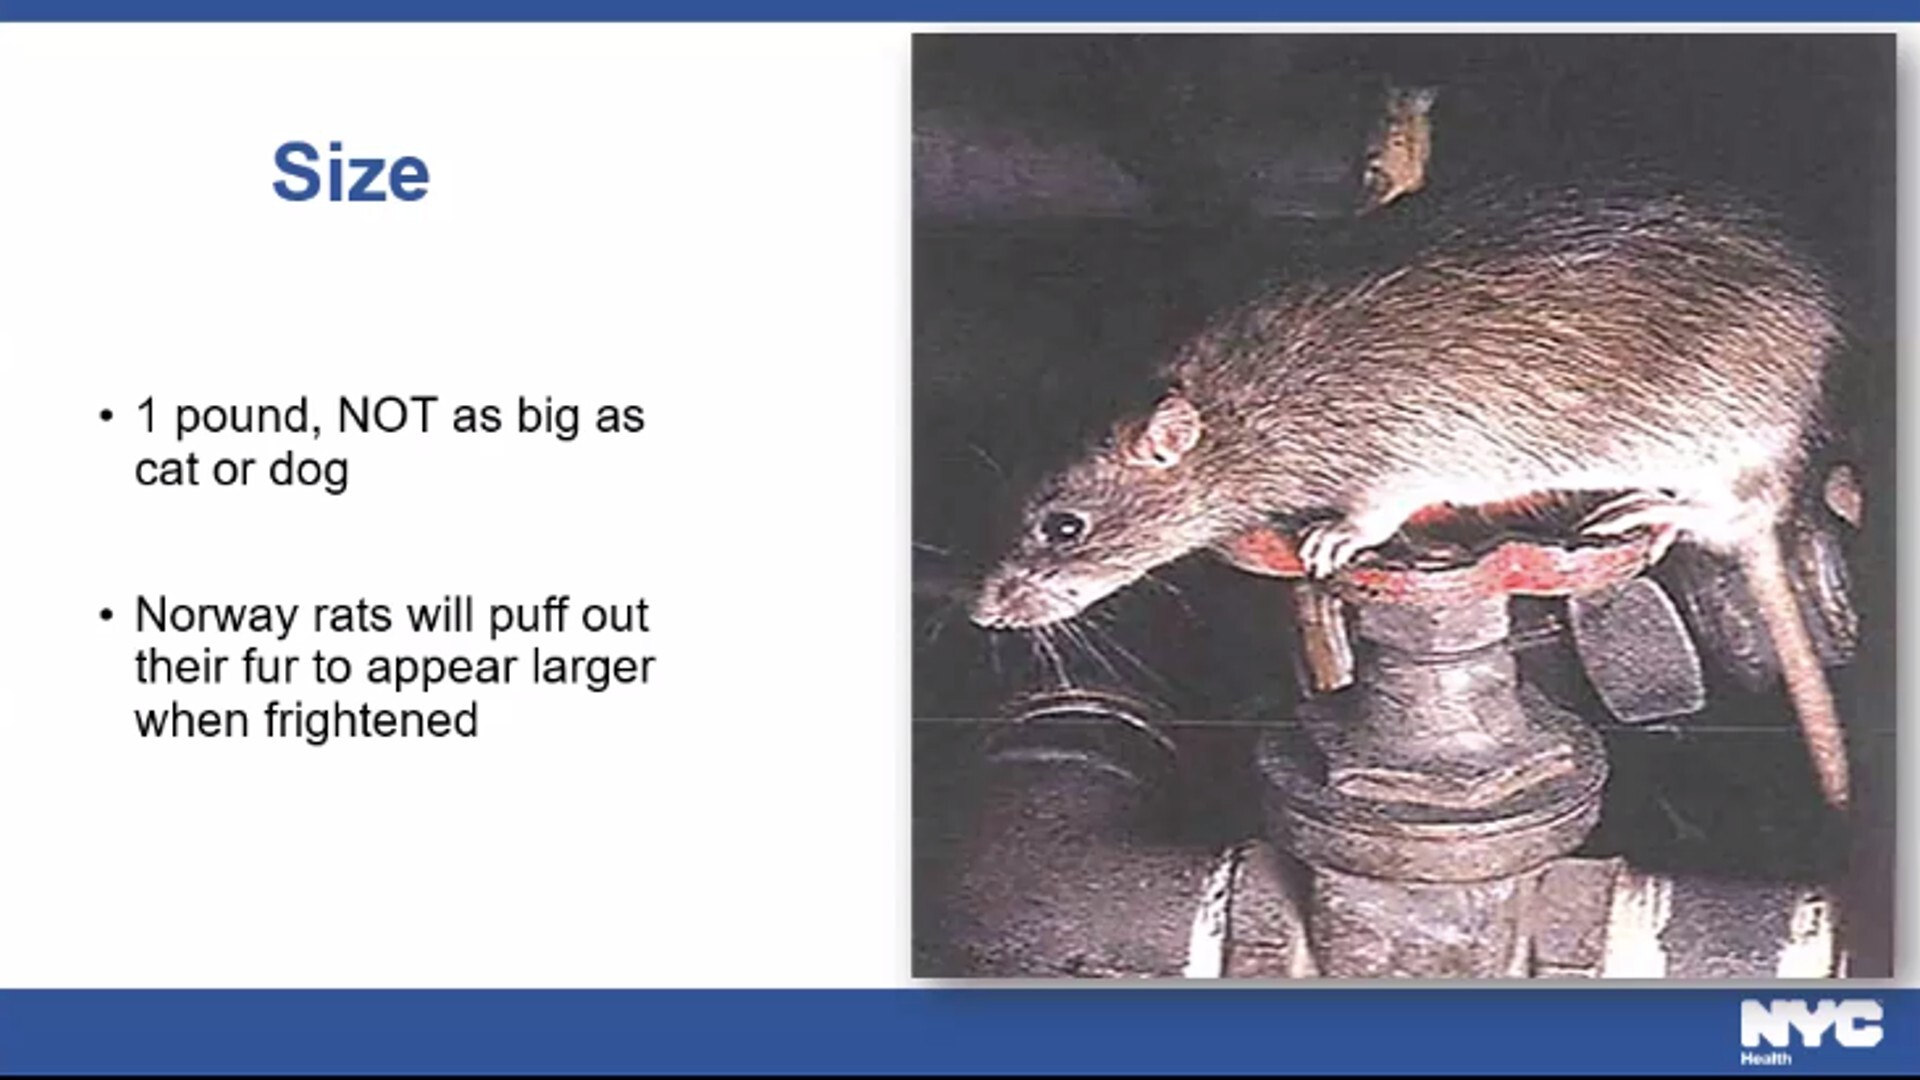 A powerpoint slide from the rat academy showing a rat and the heading "Size." "1 pound, NOT as big as a cat or dog."